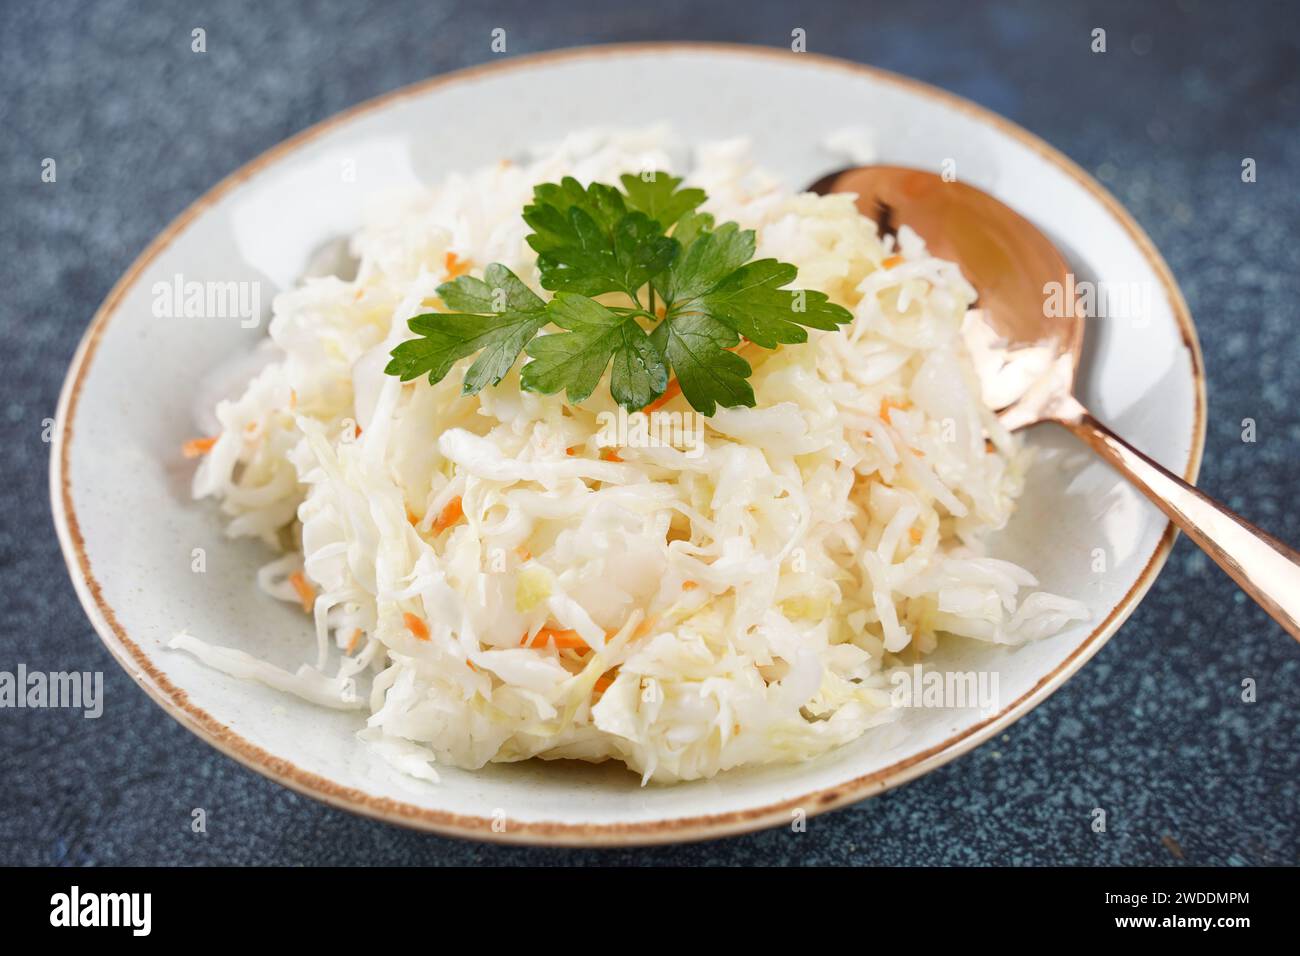 Sauerkraut - fermented cabbage with carrot  in the bowl Stock Photo